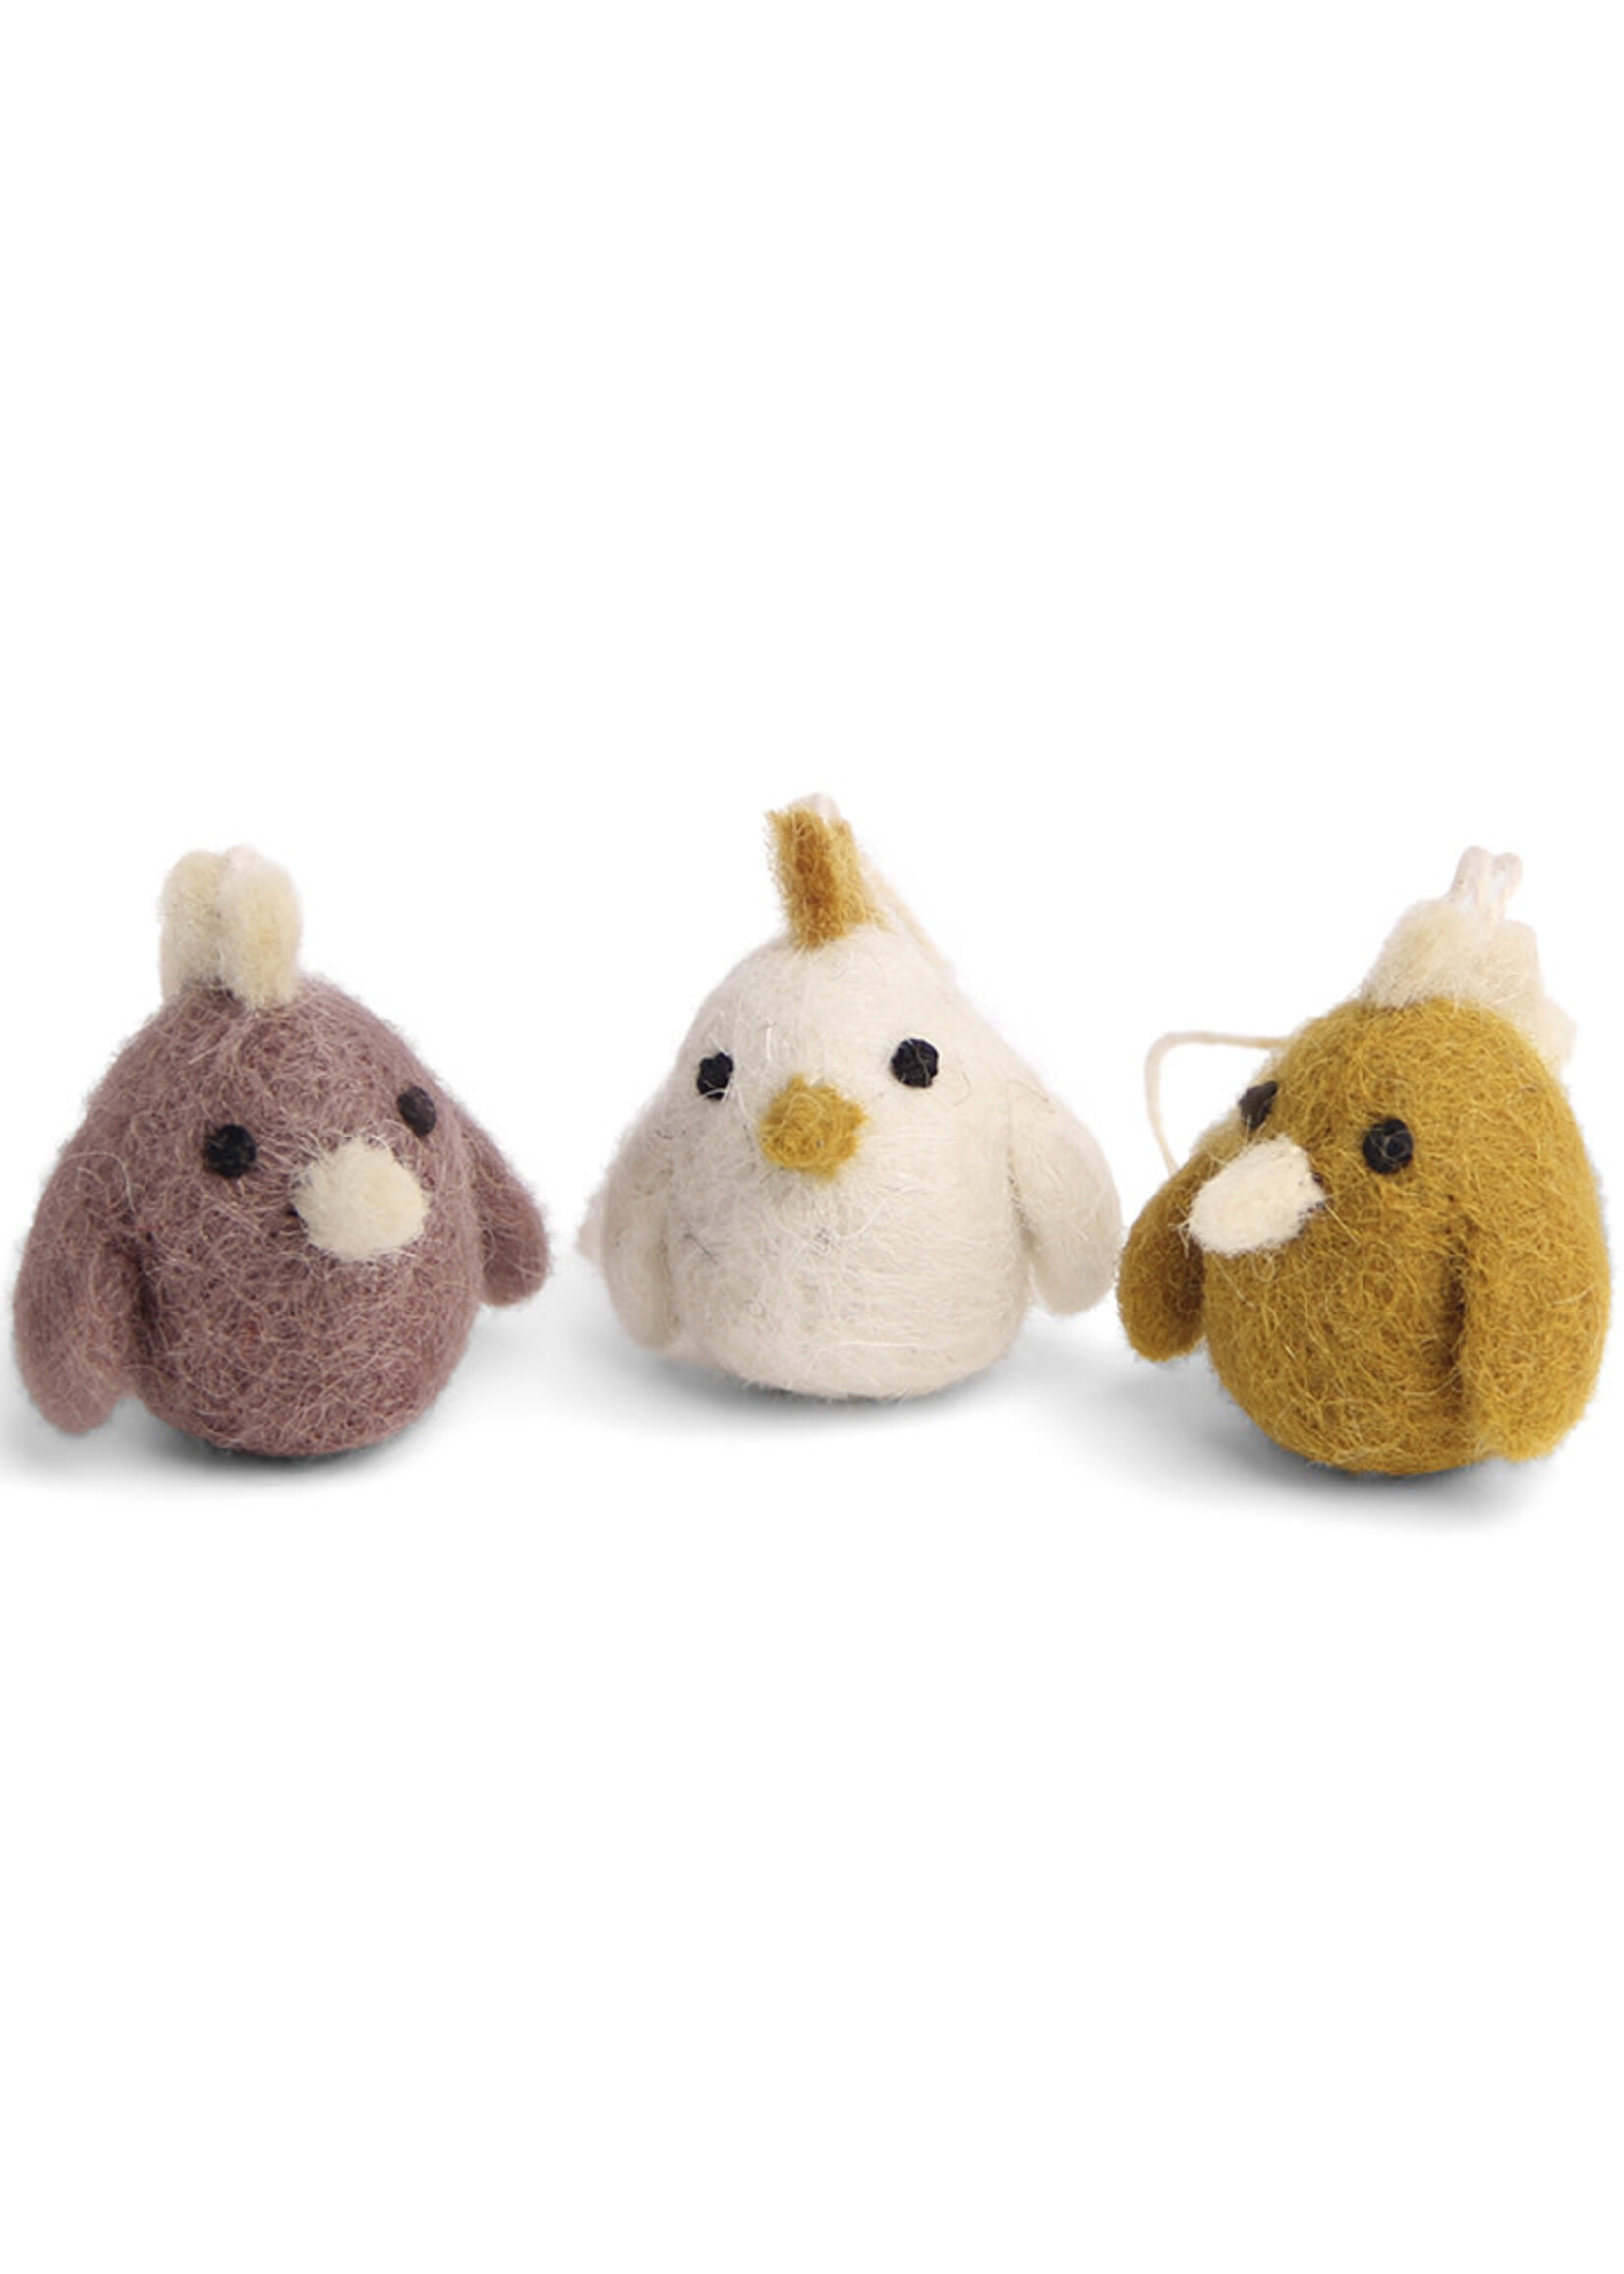 Gry and Sif Felt Mini Rooster Ornament Set